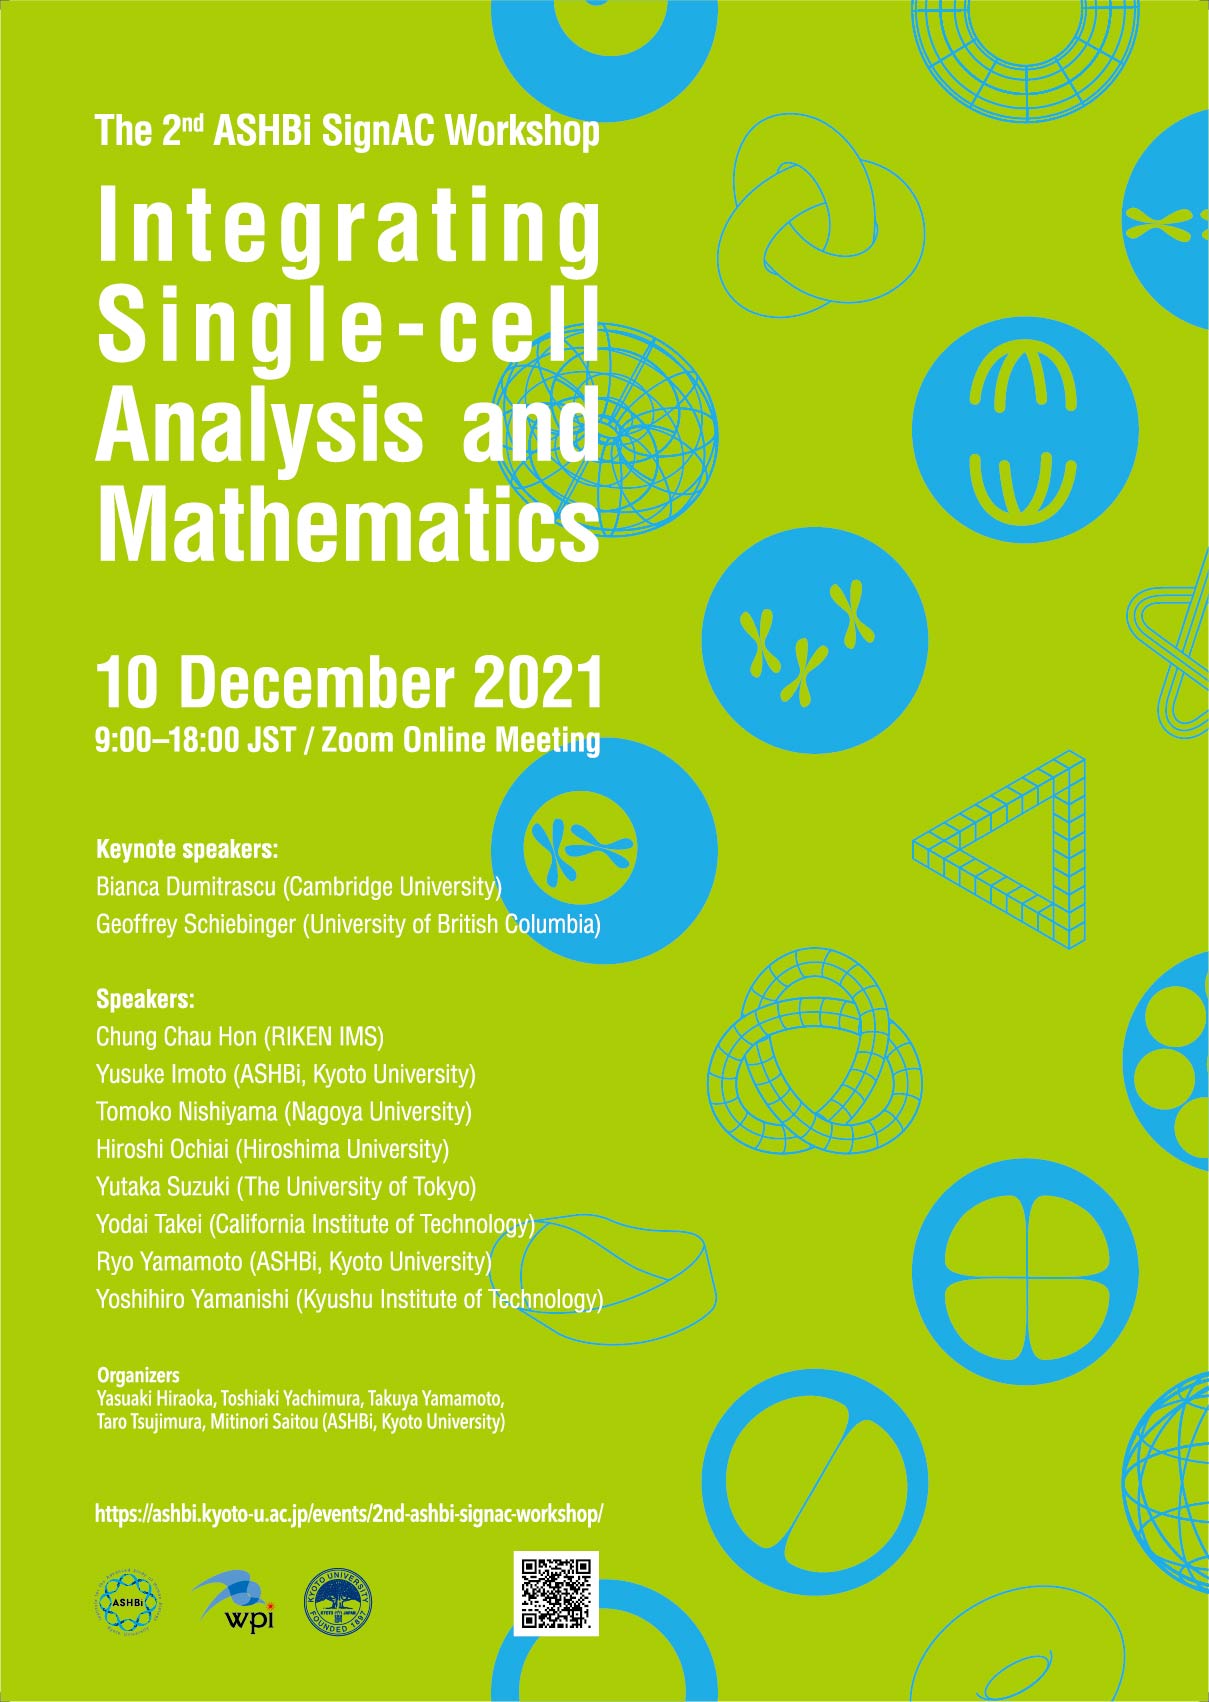 [Event Report] The 2nd ASHBi SignAC Workshop: Integrating Single-cell Analysis and Mathematics